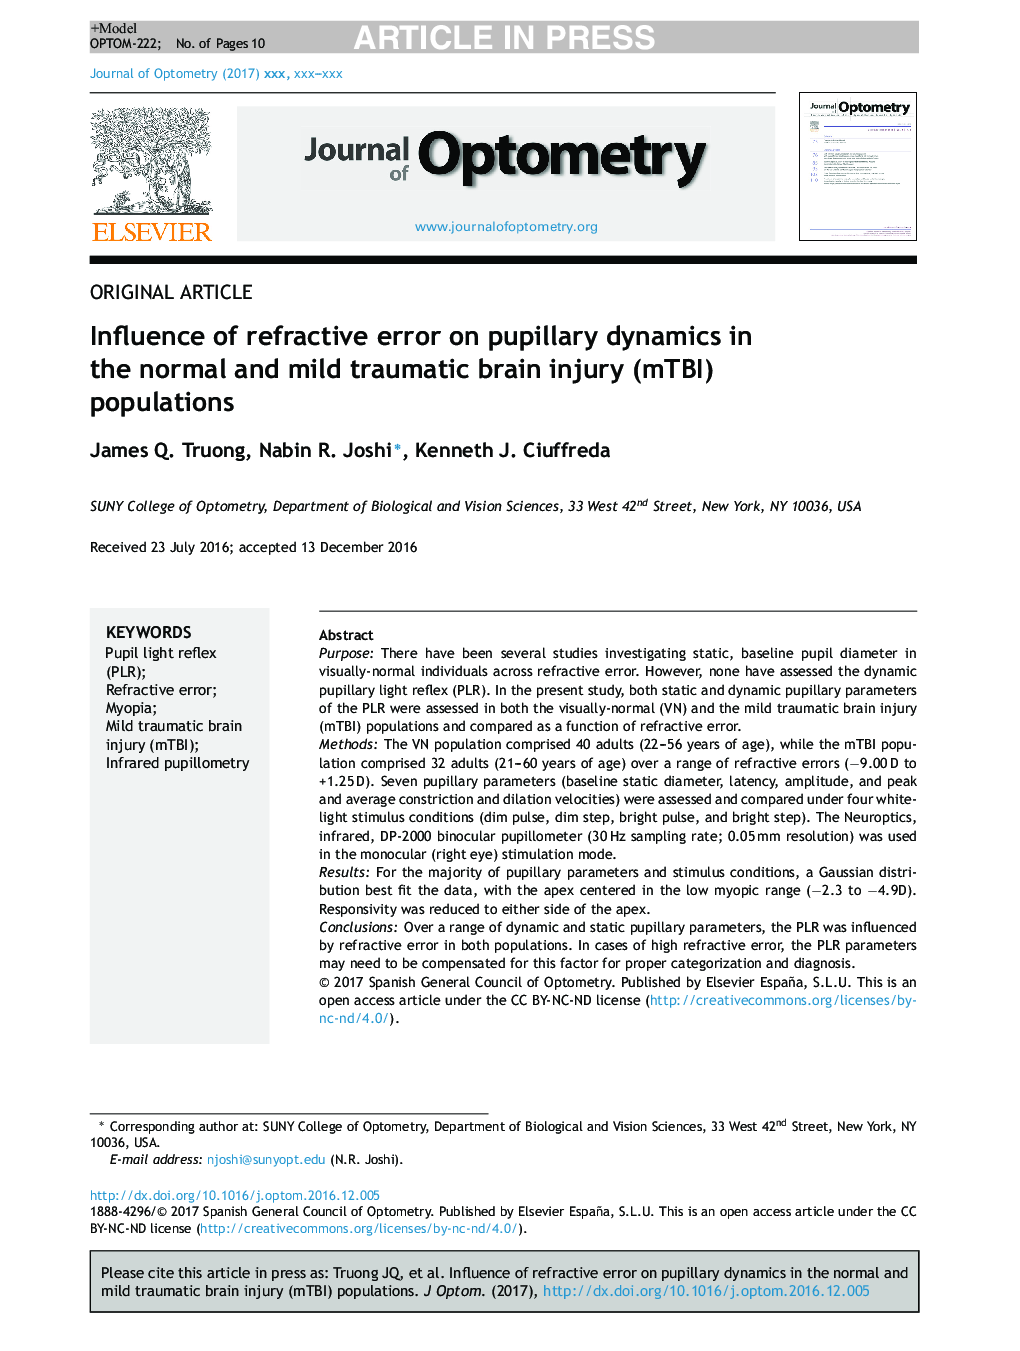 Influence of refractive error on pupillary dynamics in the normal and mild traumatic brain injury (mTBI) populations